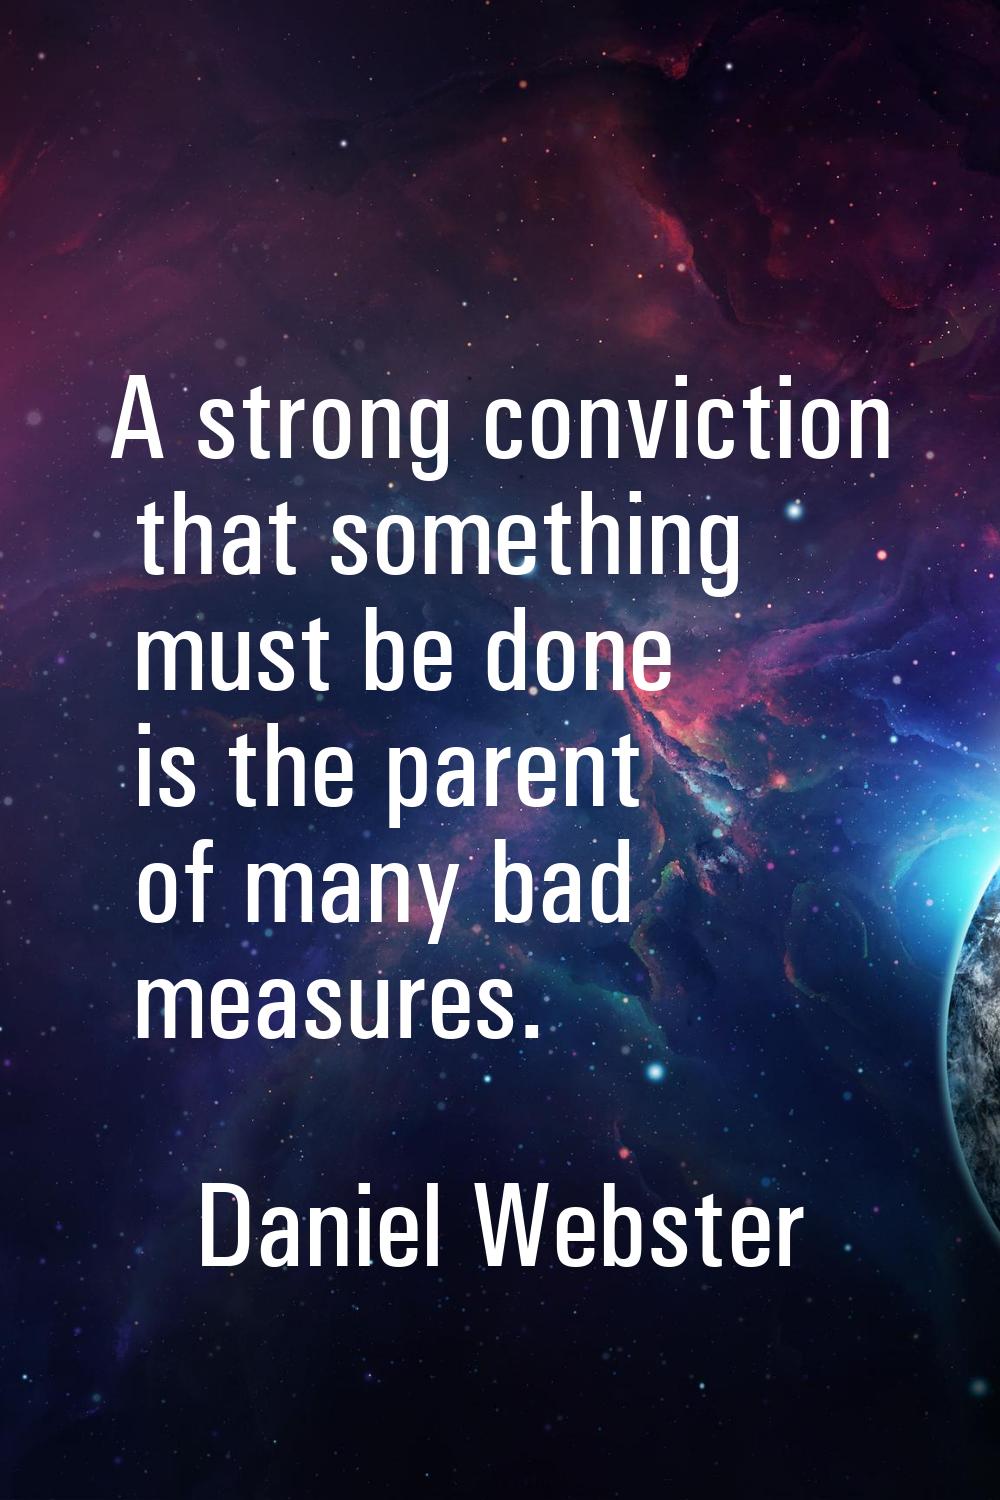 A strong conviction that something must be done is the parent of many bad measures.